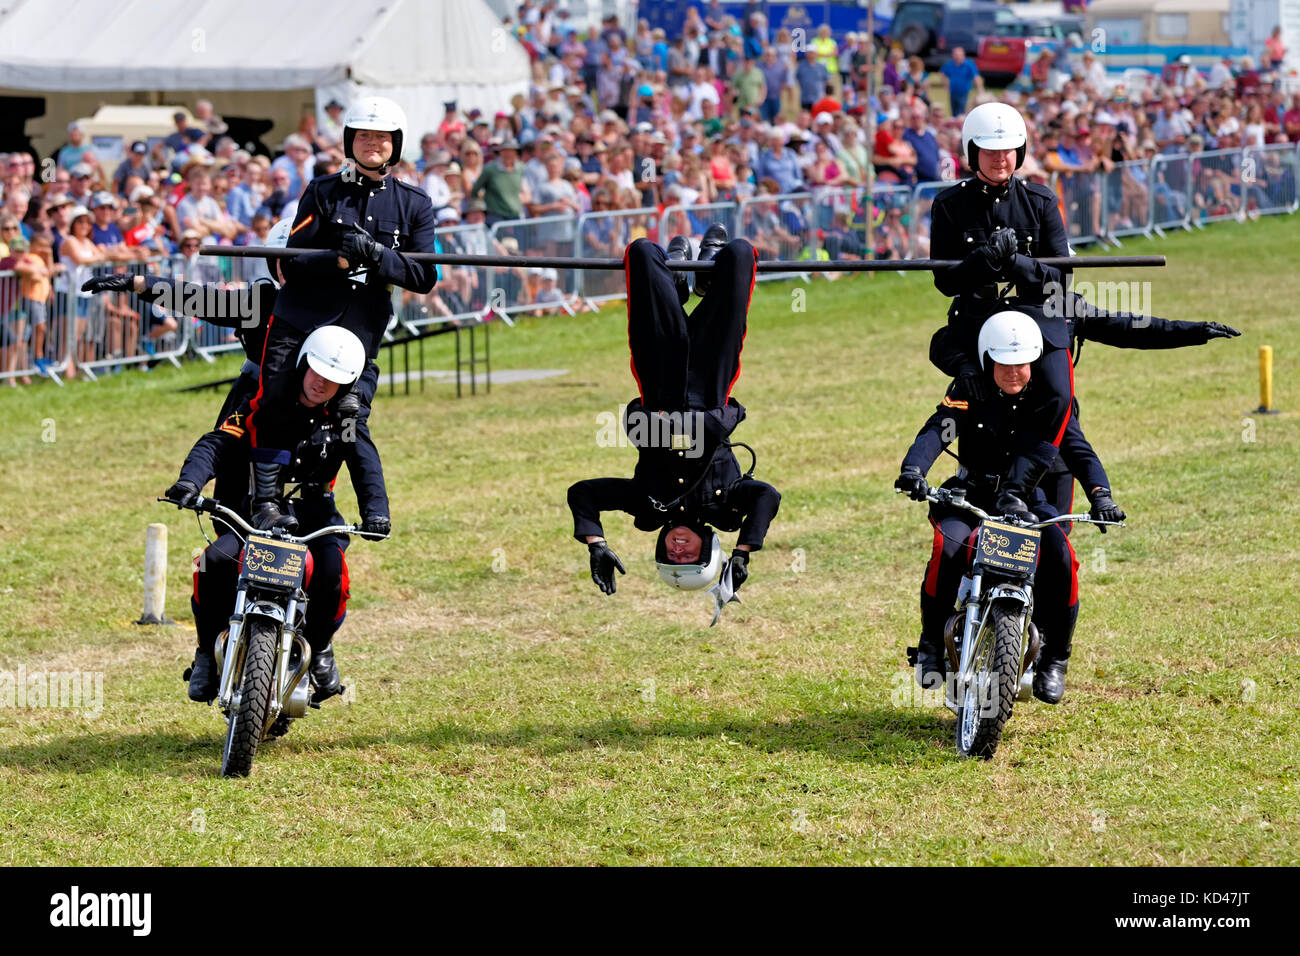 the-british-army-royal-signals-motorcycle-display-team-the-white-helmets-KD47JT.jpg